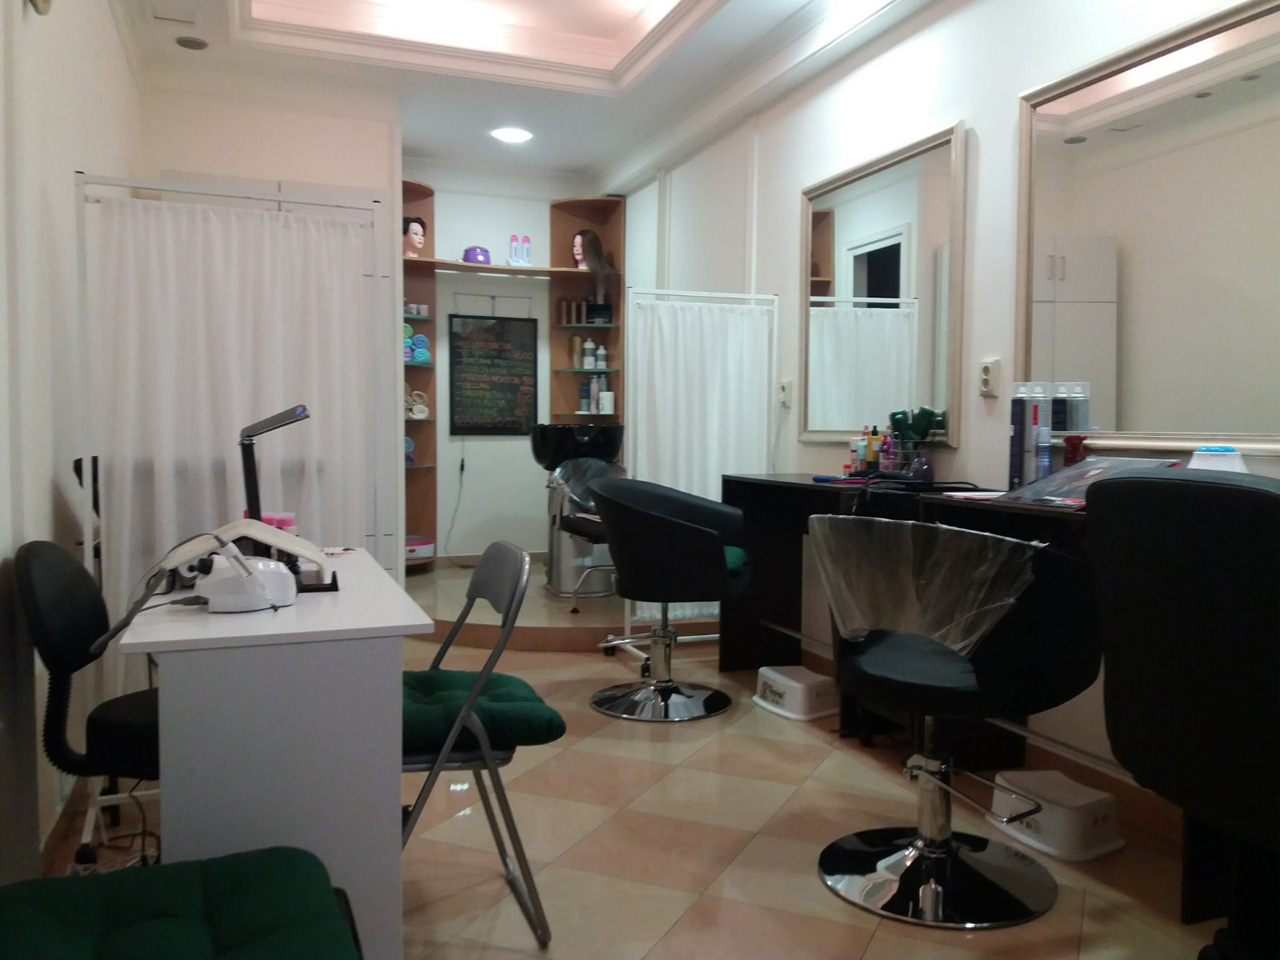 HAIRDRESSING AND BEAUTY STUDIO EMILLY 14 Hairdressers Belgrade - Photo 1